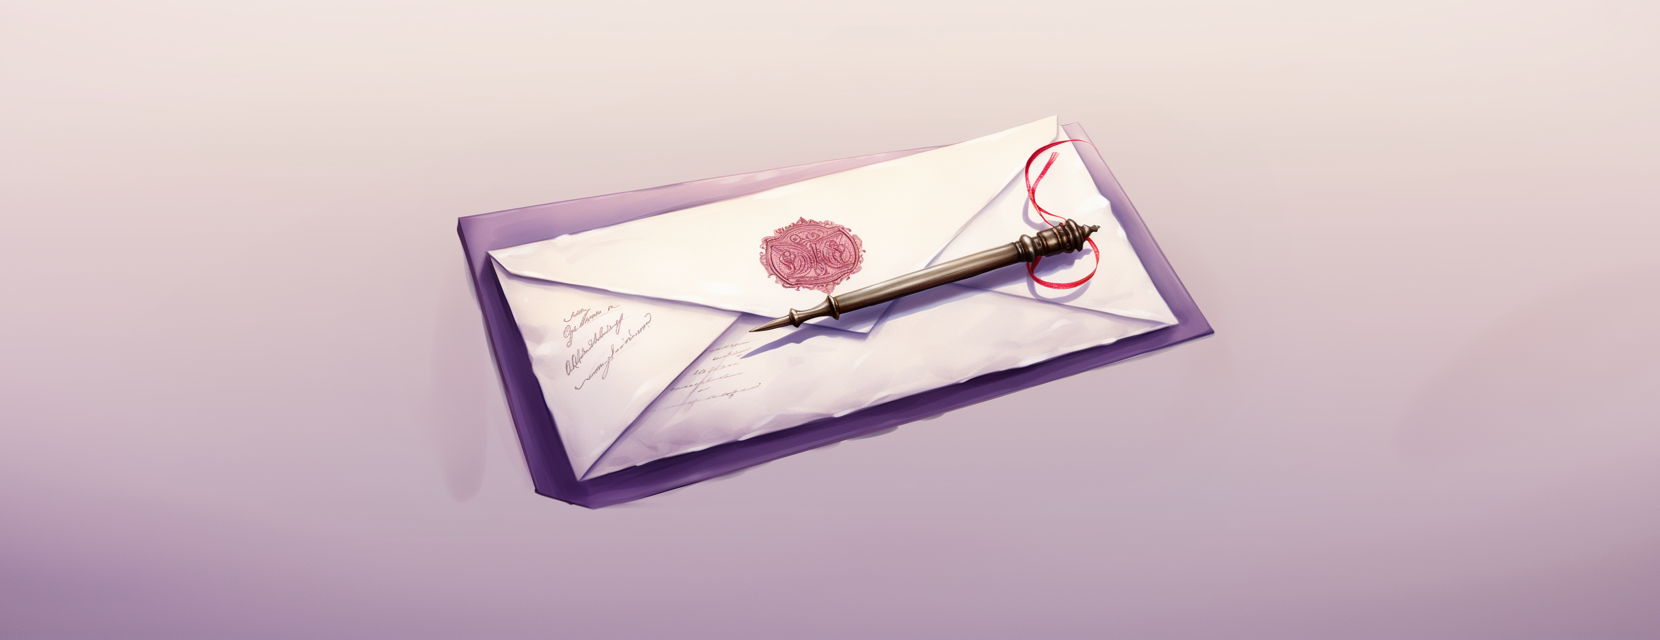 a graphic of an invitation with a seal and pen asking someone for a donation